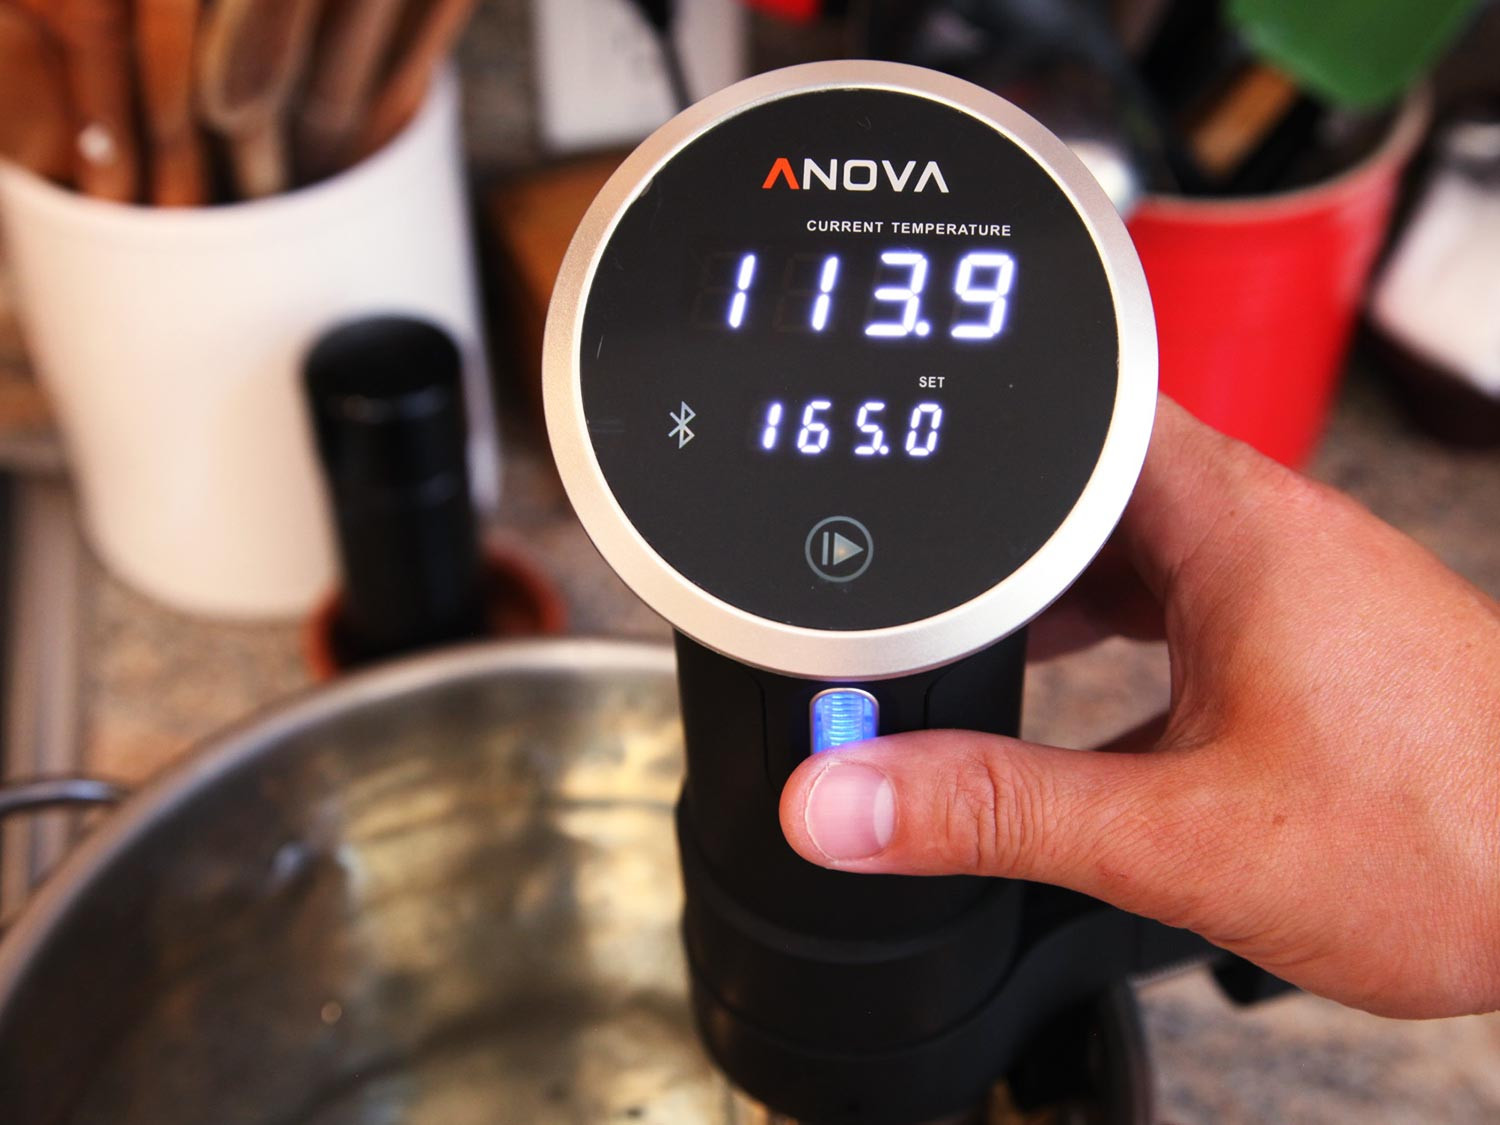 Sous Vide Chicken Thighs Temp
 How To Make Sous Vide Chicken Thighs With Crispy Skin